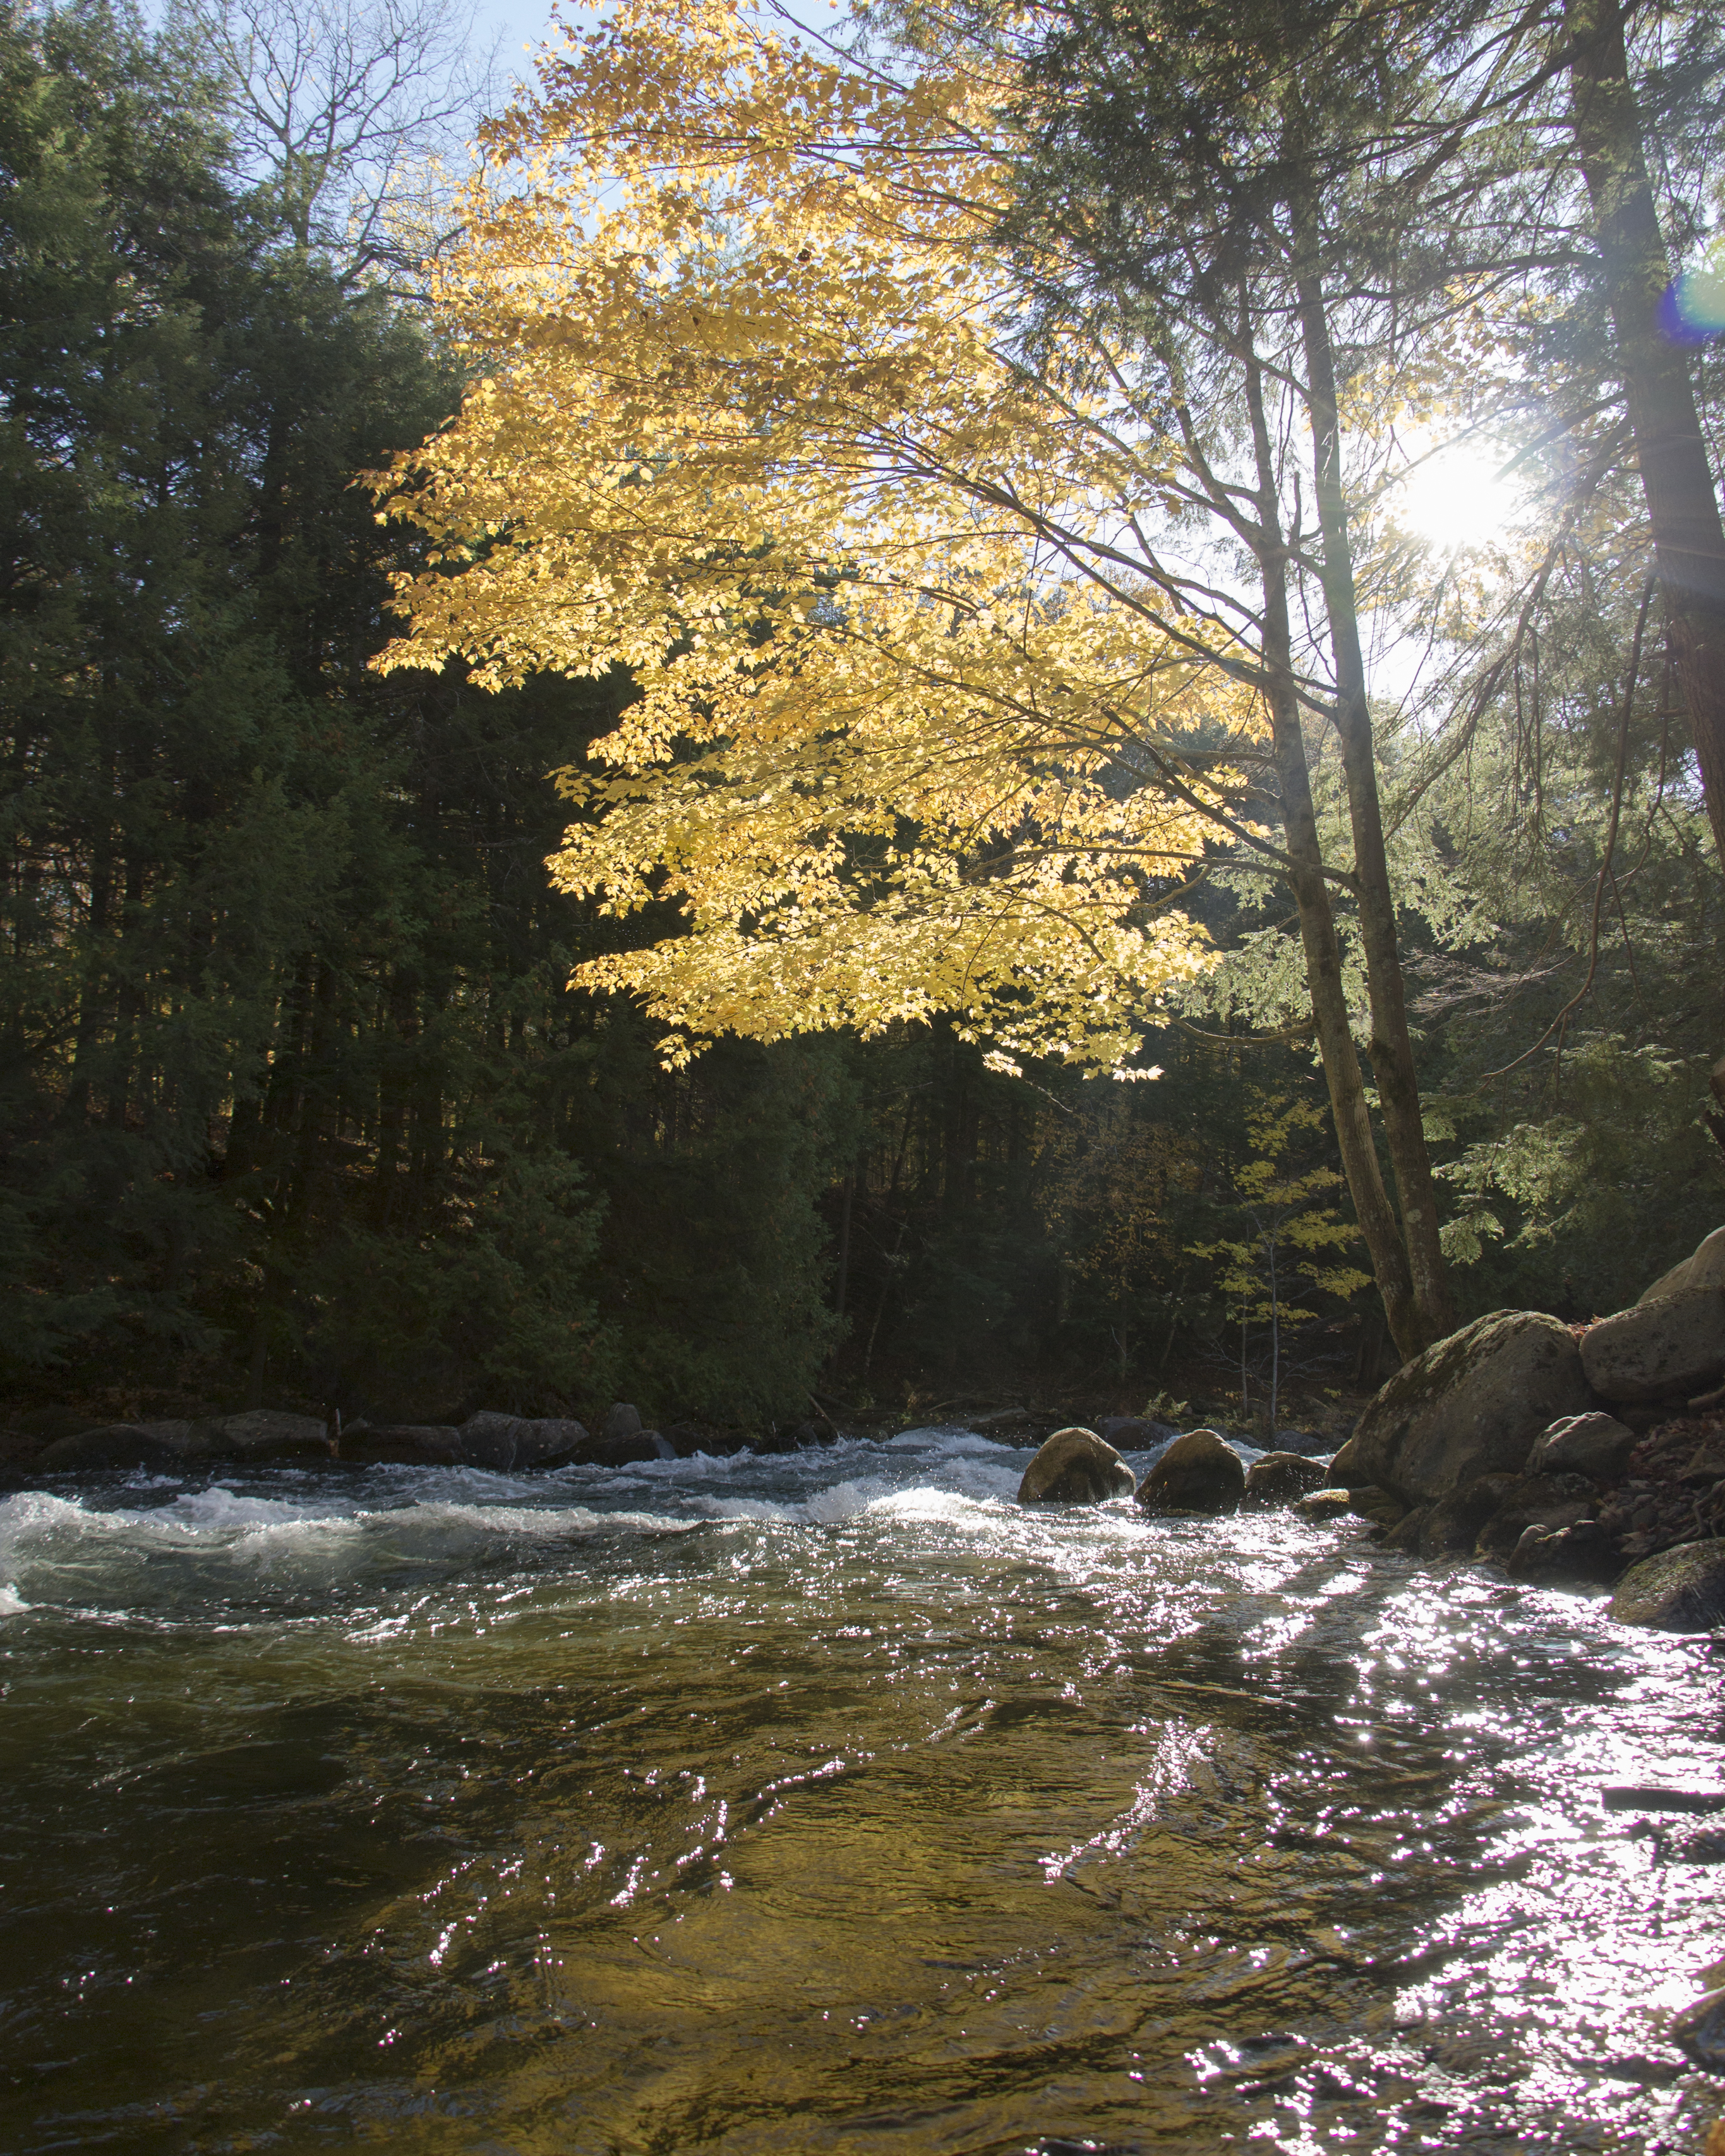 A yellow leafed tree arching over rapids